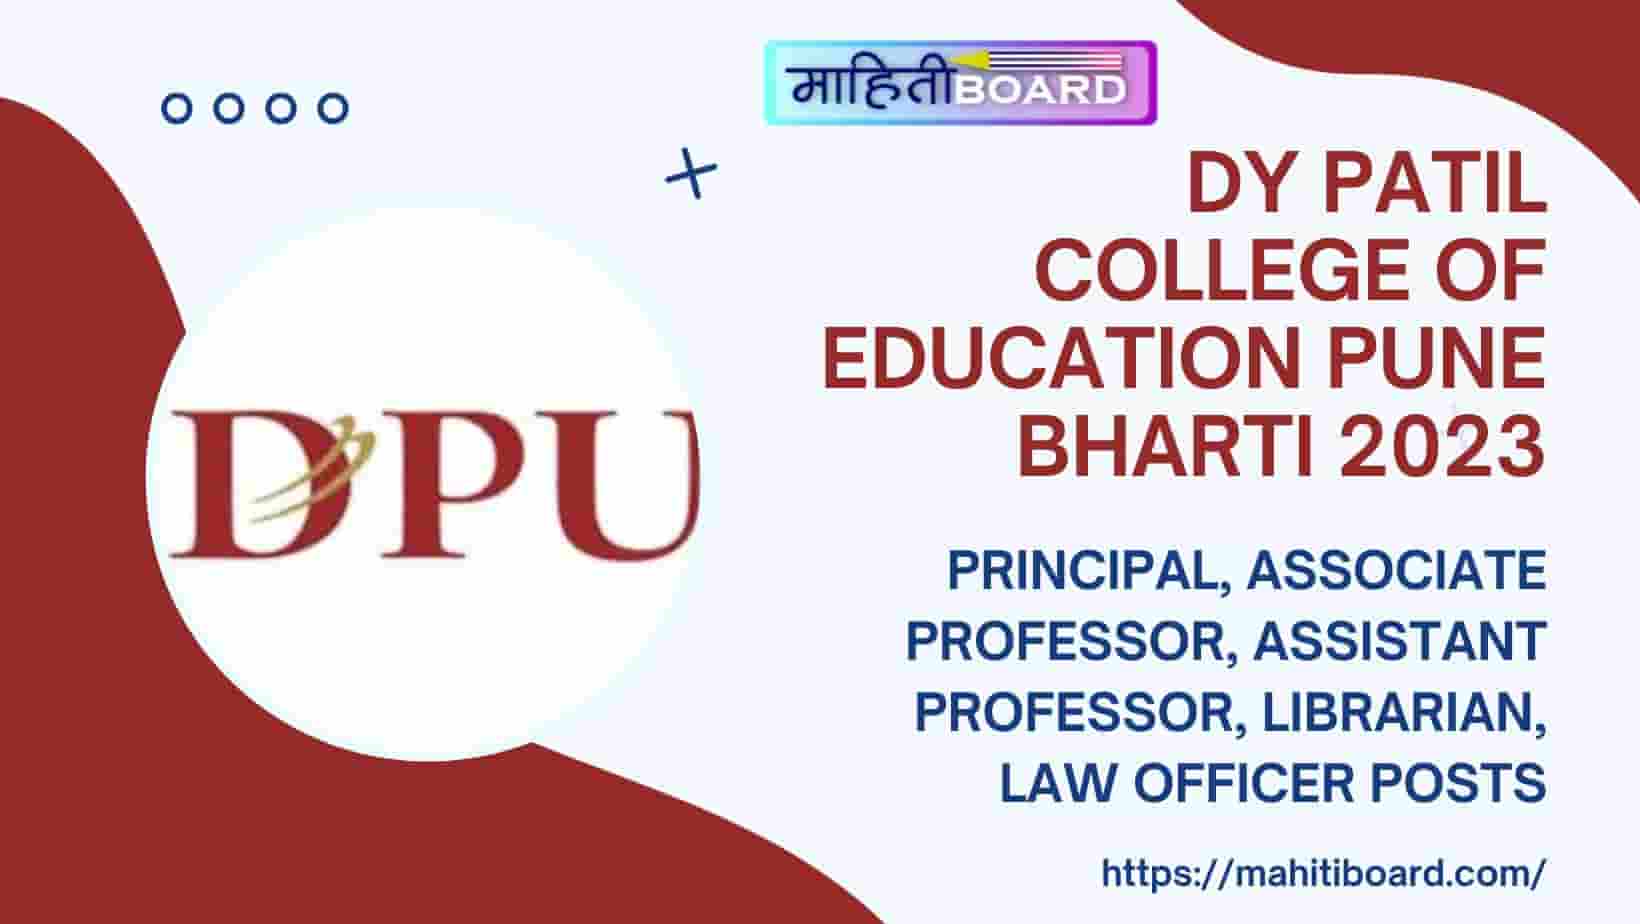 DY Patil College of Education Pune Bharti 2023